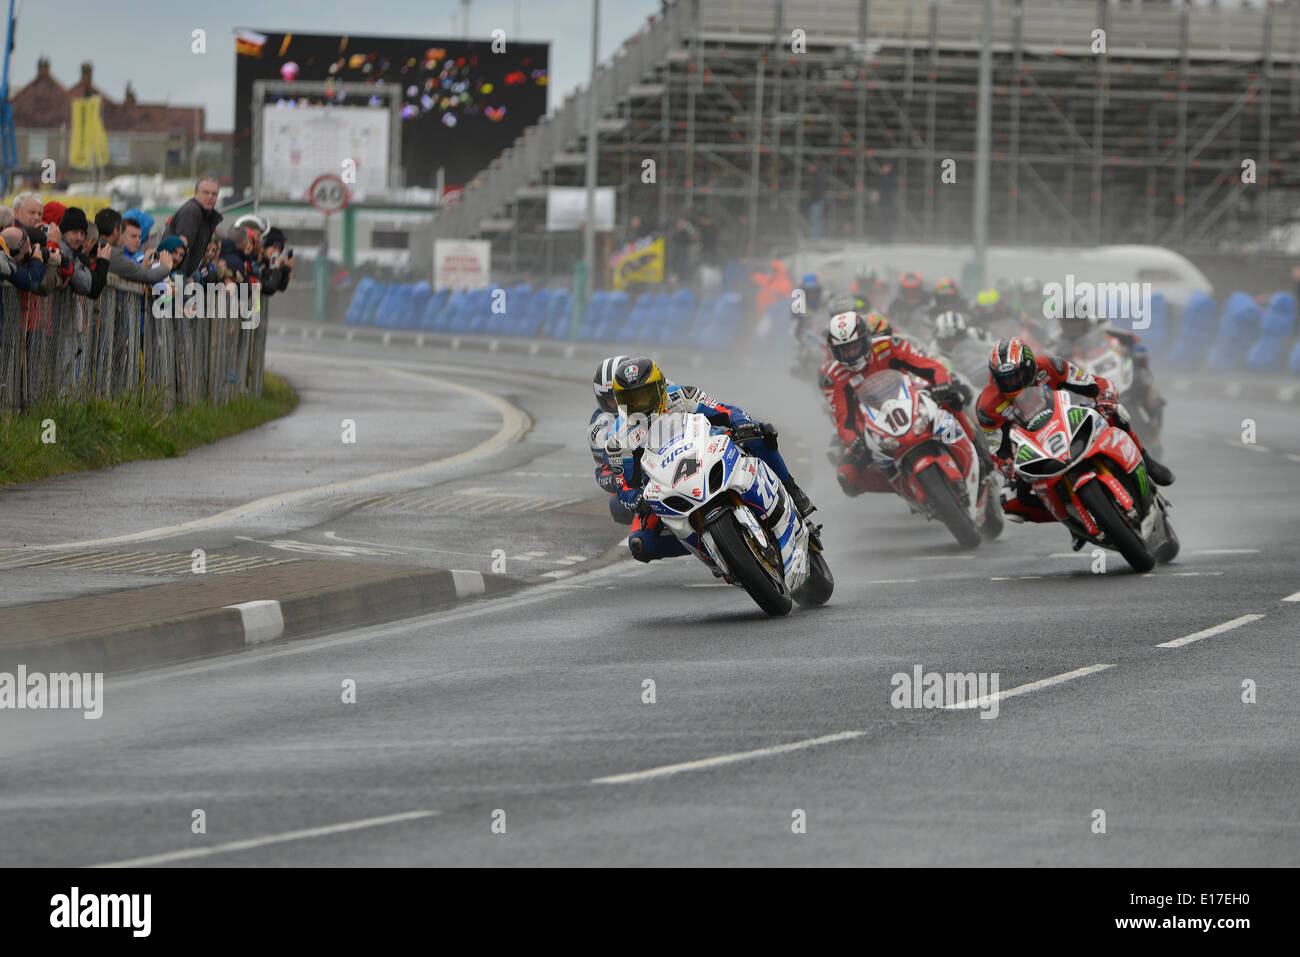 Guy Martin leading the pack during the 2014 Vauxhall NW200 road race Stock Photo